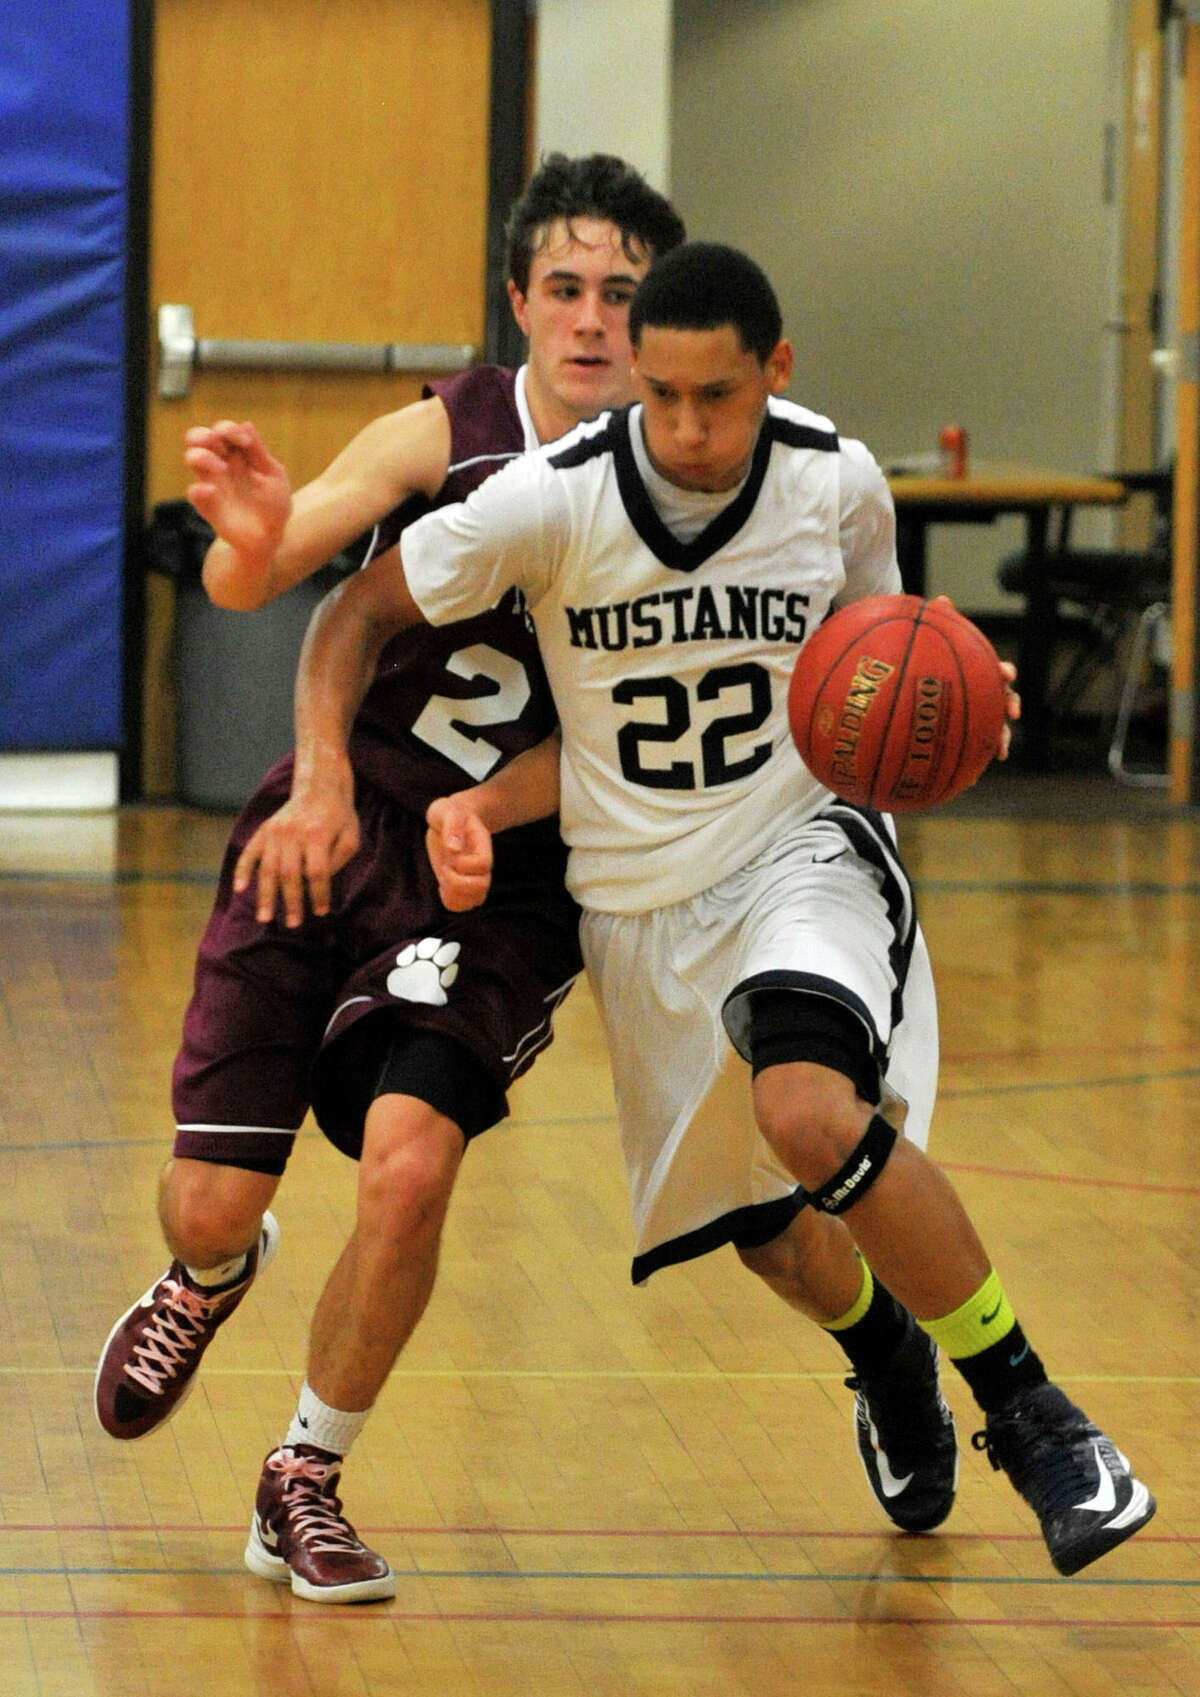 Immaculate's Joey Wallace dribbles up the floor while under pressure from Bethel's Frankie Magrone during their game in the first round of The News-Times Greater Danbury Tip-Off Classic at the Danbury War Memorial on Thursday, Dec. 13, 2012. Bethel advanced to the next round beating Immaculate 67-52.